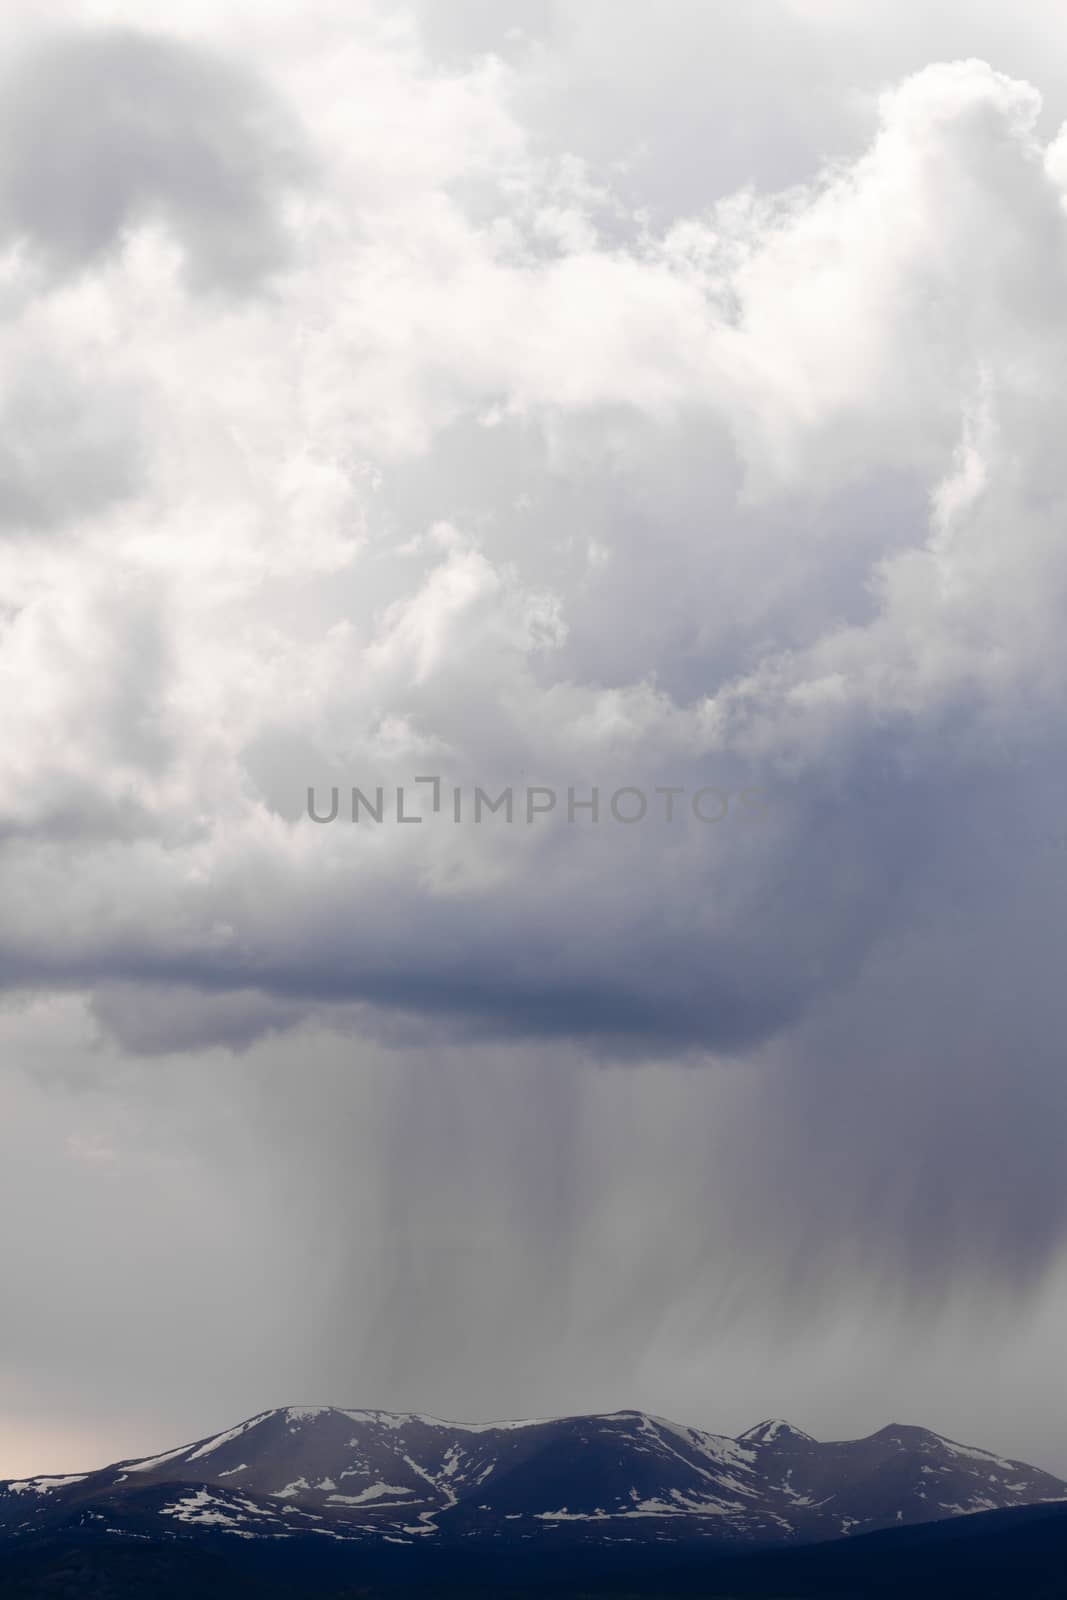 Dramatic rain storm clouds over snowy mountains by PiLens